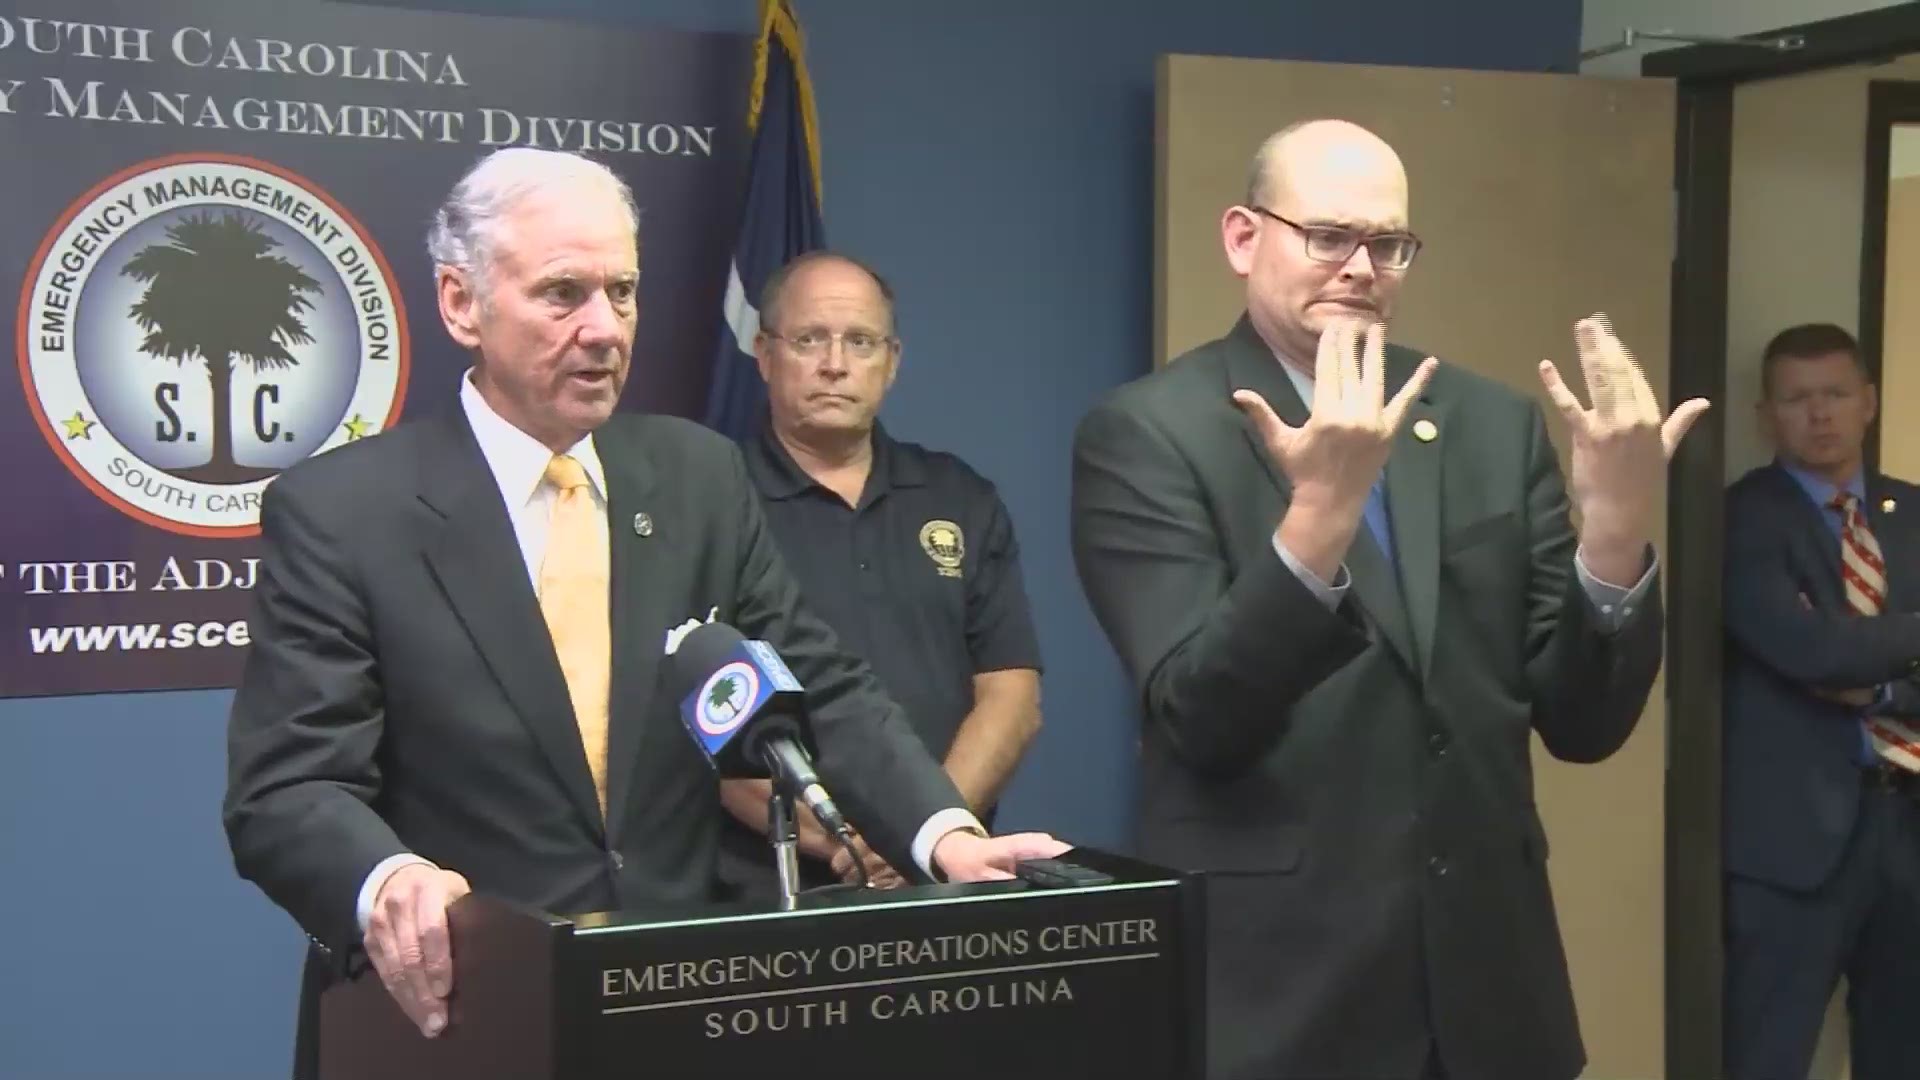 South Carolina's governor is urging people to make preparations now.